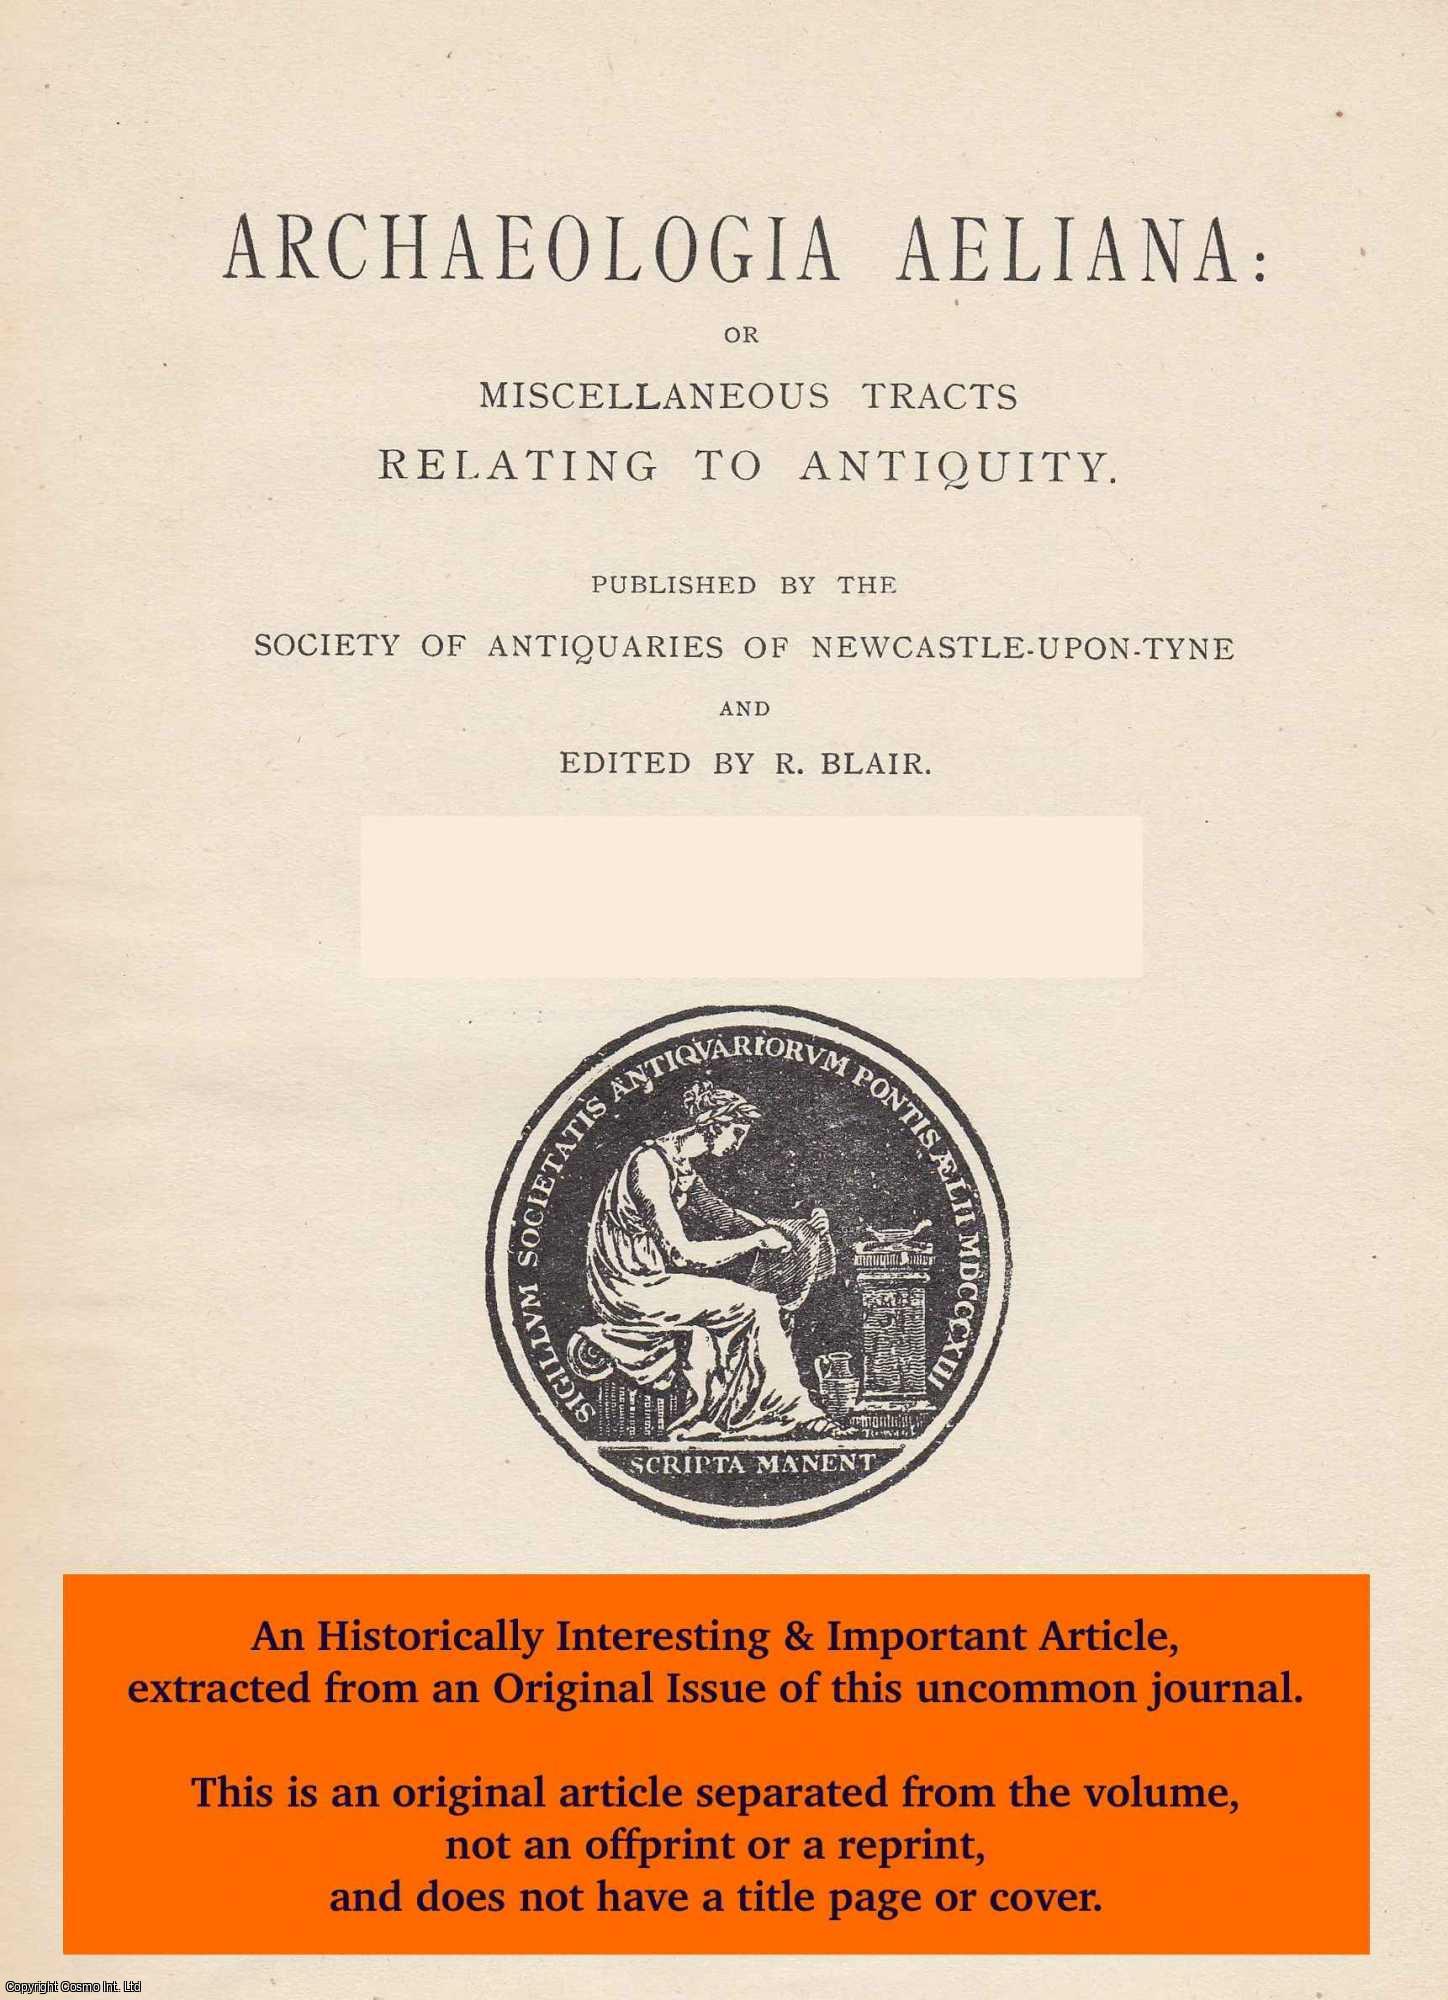 A.H.A. Hogg, A. H. A. - Further Excavations at Ingram Hill. An original article from The Archaeologia Aeliana: or Miscellaneous Tracts Relating to Antiquity, 1956.